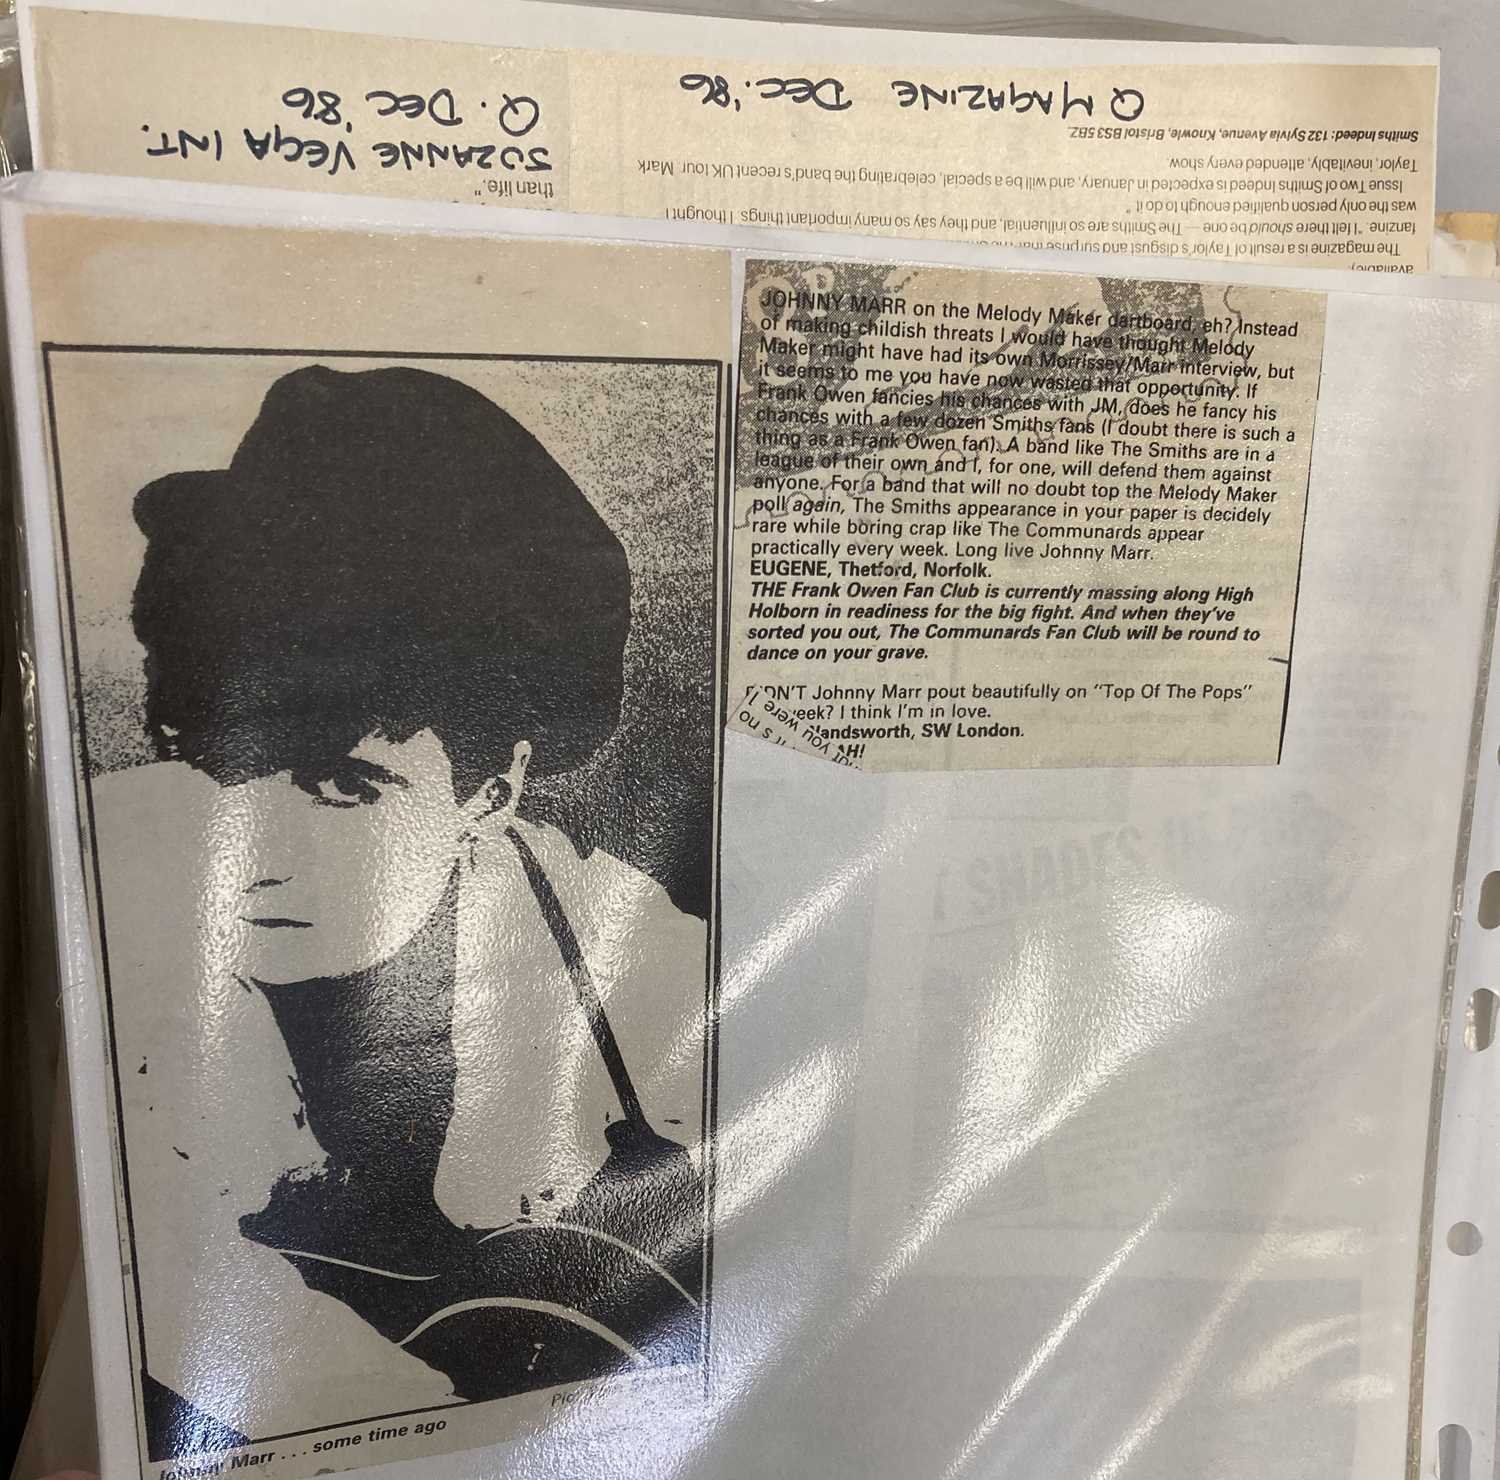 SMITHS PRESS CUTTINGS ARCHIVE - Image 16 of 16